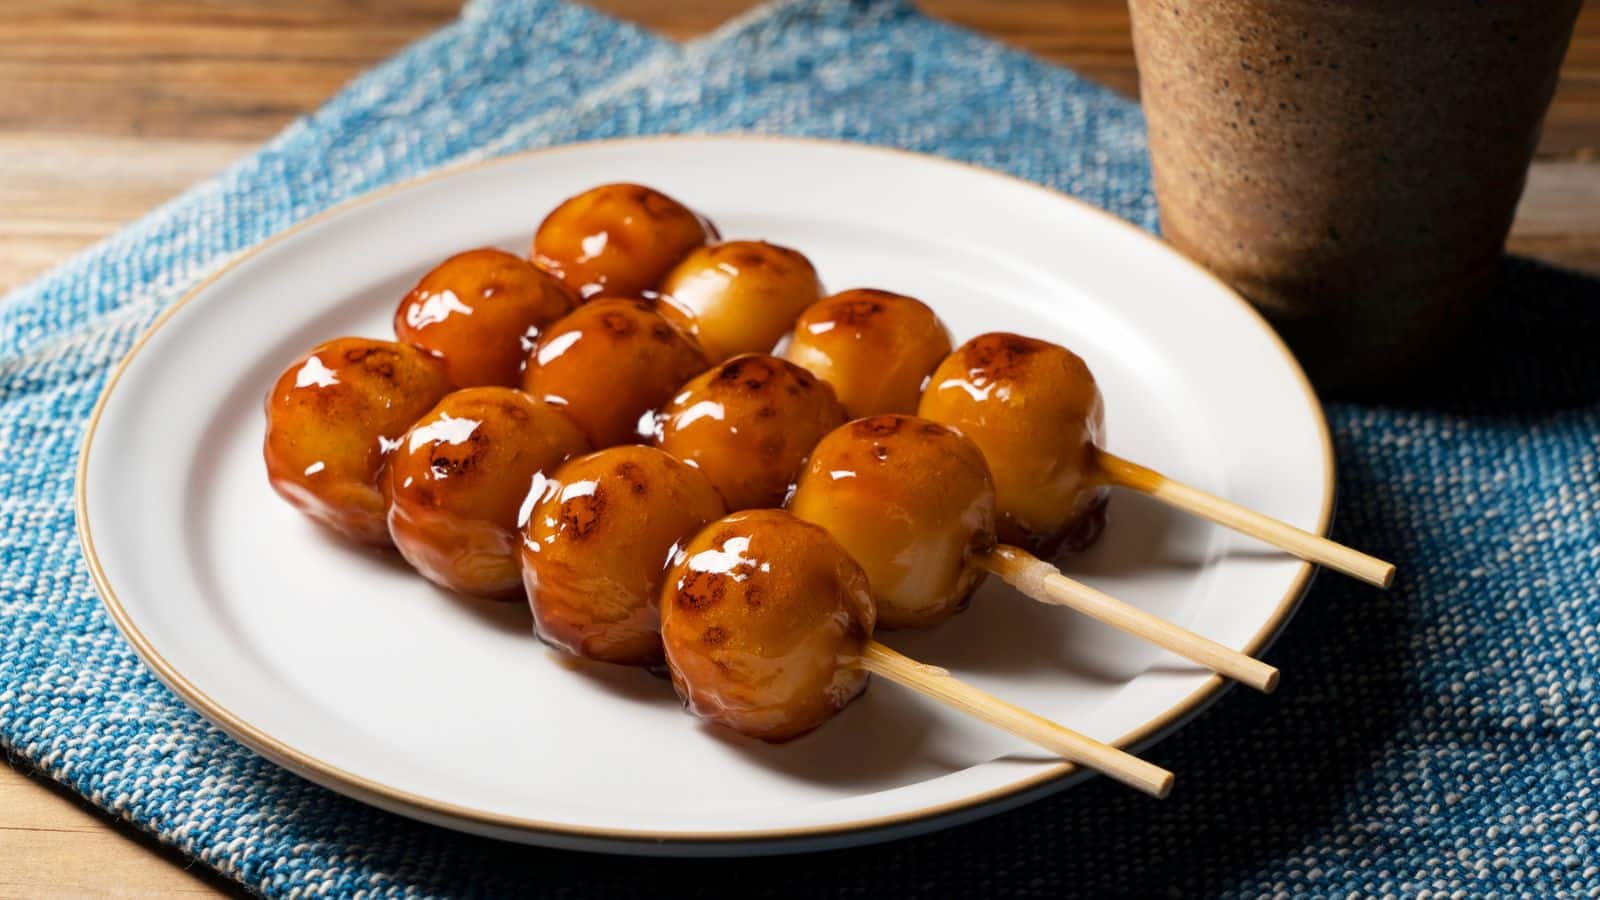 <p><span>Dango is a traditional Japanese dessert made of small round balls of mochi (rice flour) skewered on a stick. It comes in various flavors, such as green tea, red bean, and sesame, and is a popular snack to enjoy while strolling through the streets of Japan.</span></p><p><span>Dango isn’t merely a street snack; it’s a taste of Japanese tradition. With each bite, you experience the delicate sweetness and soft texture that is so characteristic of mochi, taking you on a sensory journey through the Land of the Rising Sun. I’m not drooling; you are.</span></p>